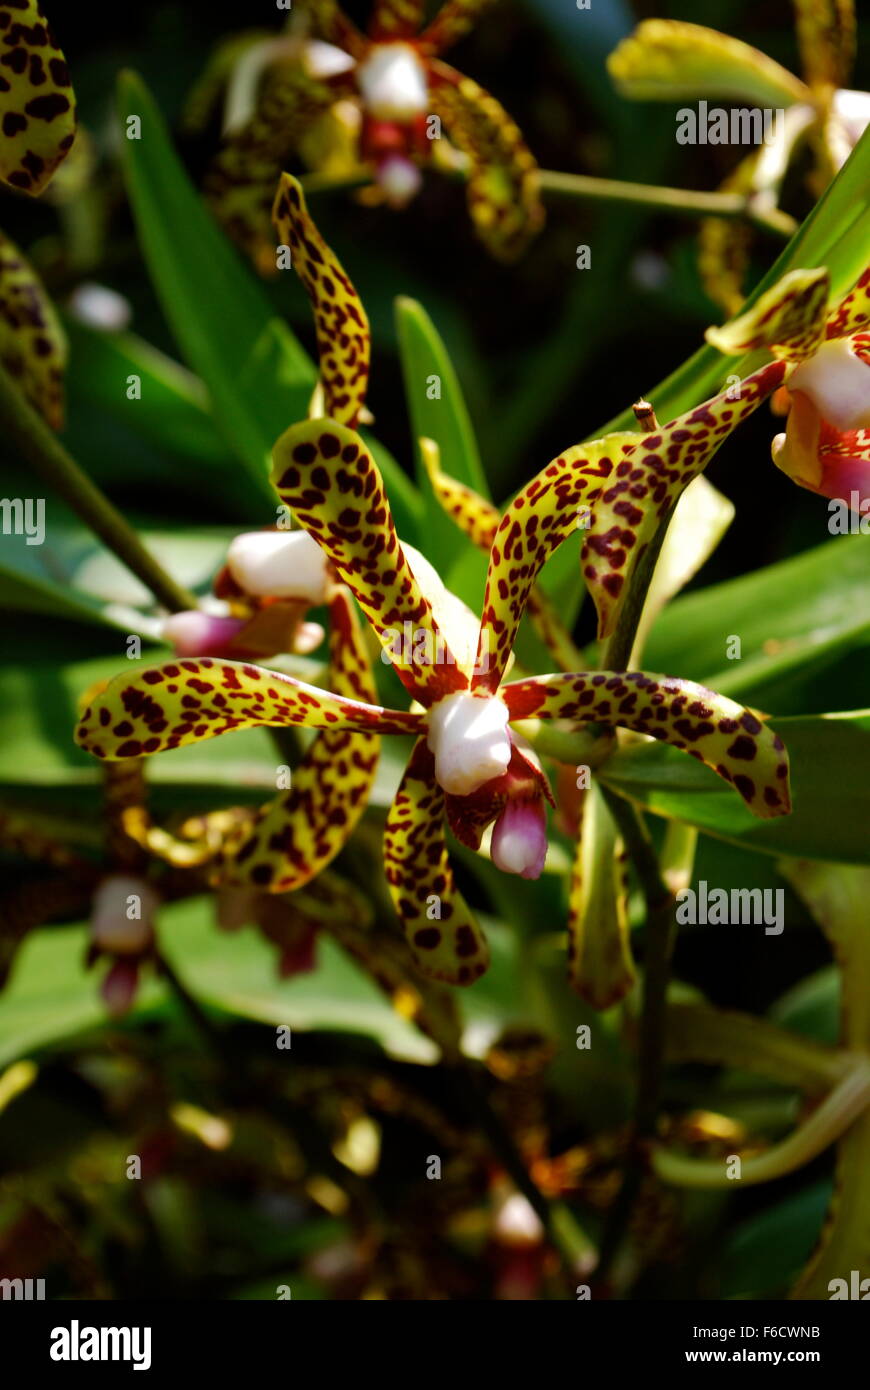 Delicate yellow and brown-spotted Oncidium orchid Stock Photo